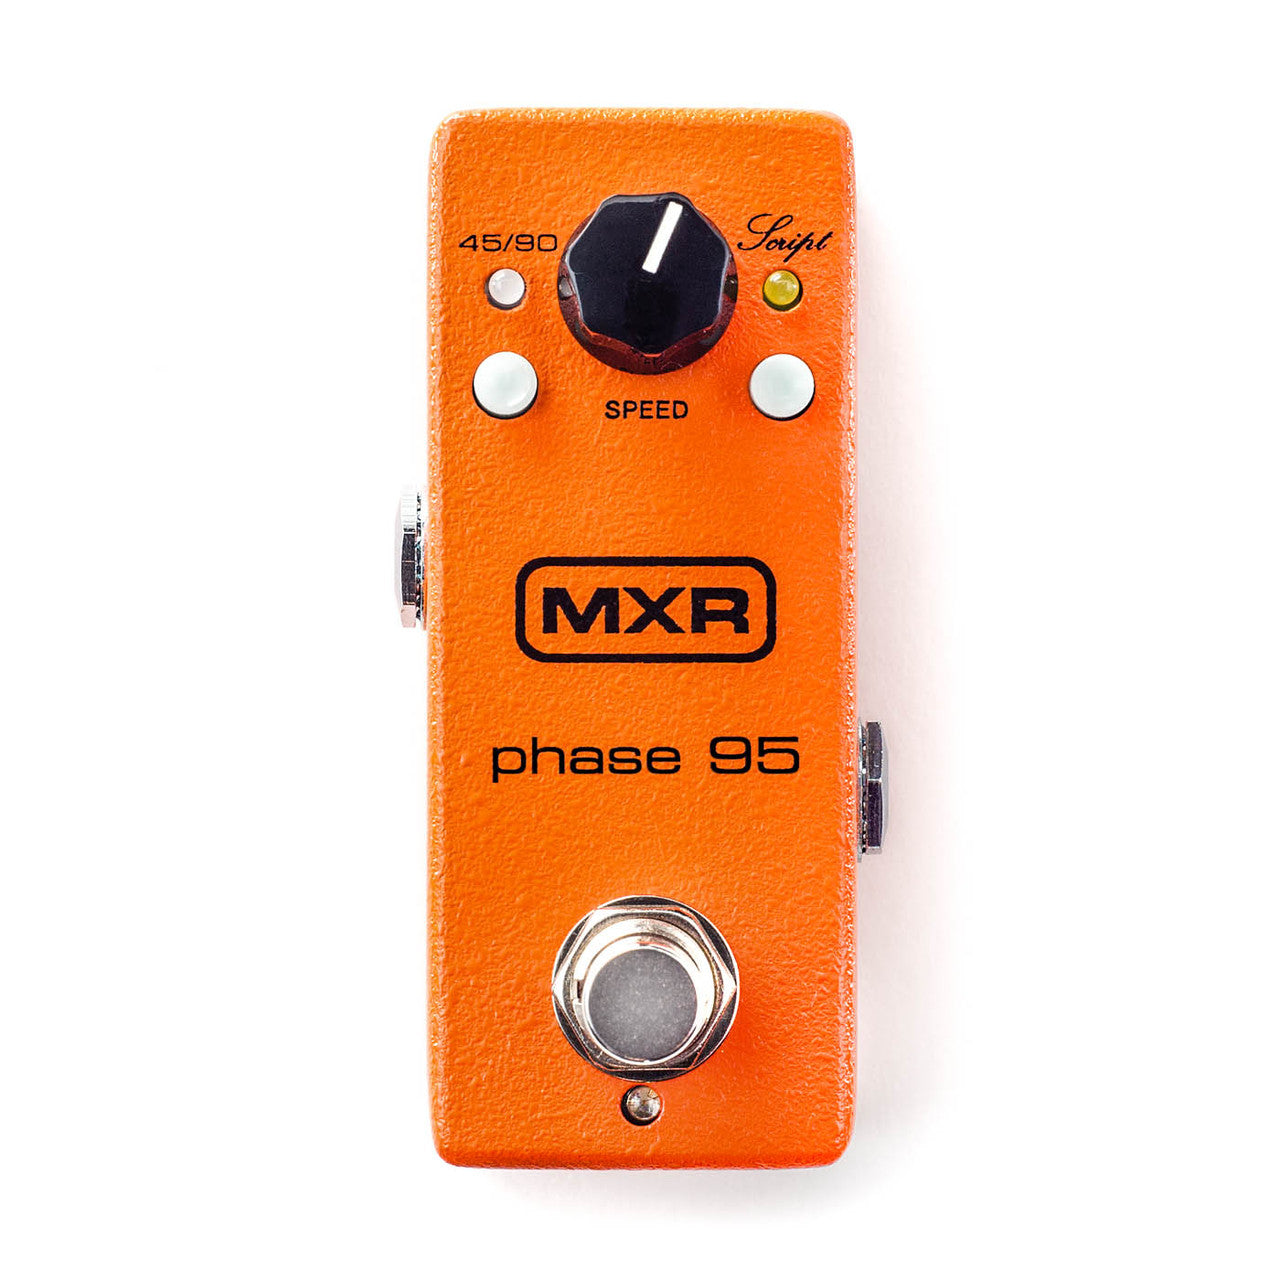 MXR M290 Phase 95 Effects Pedal